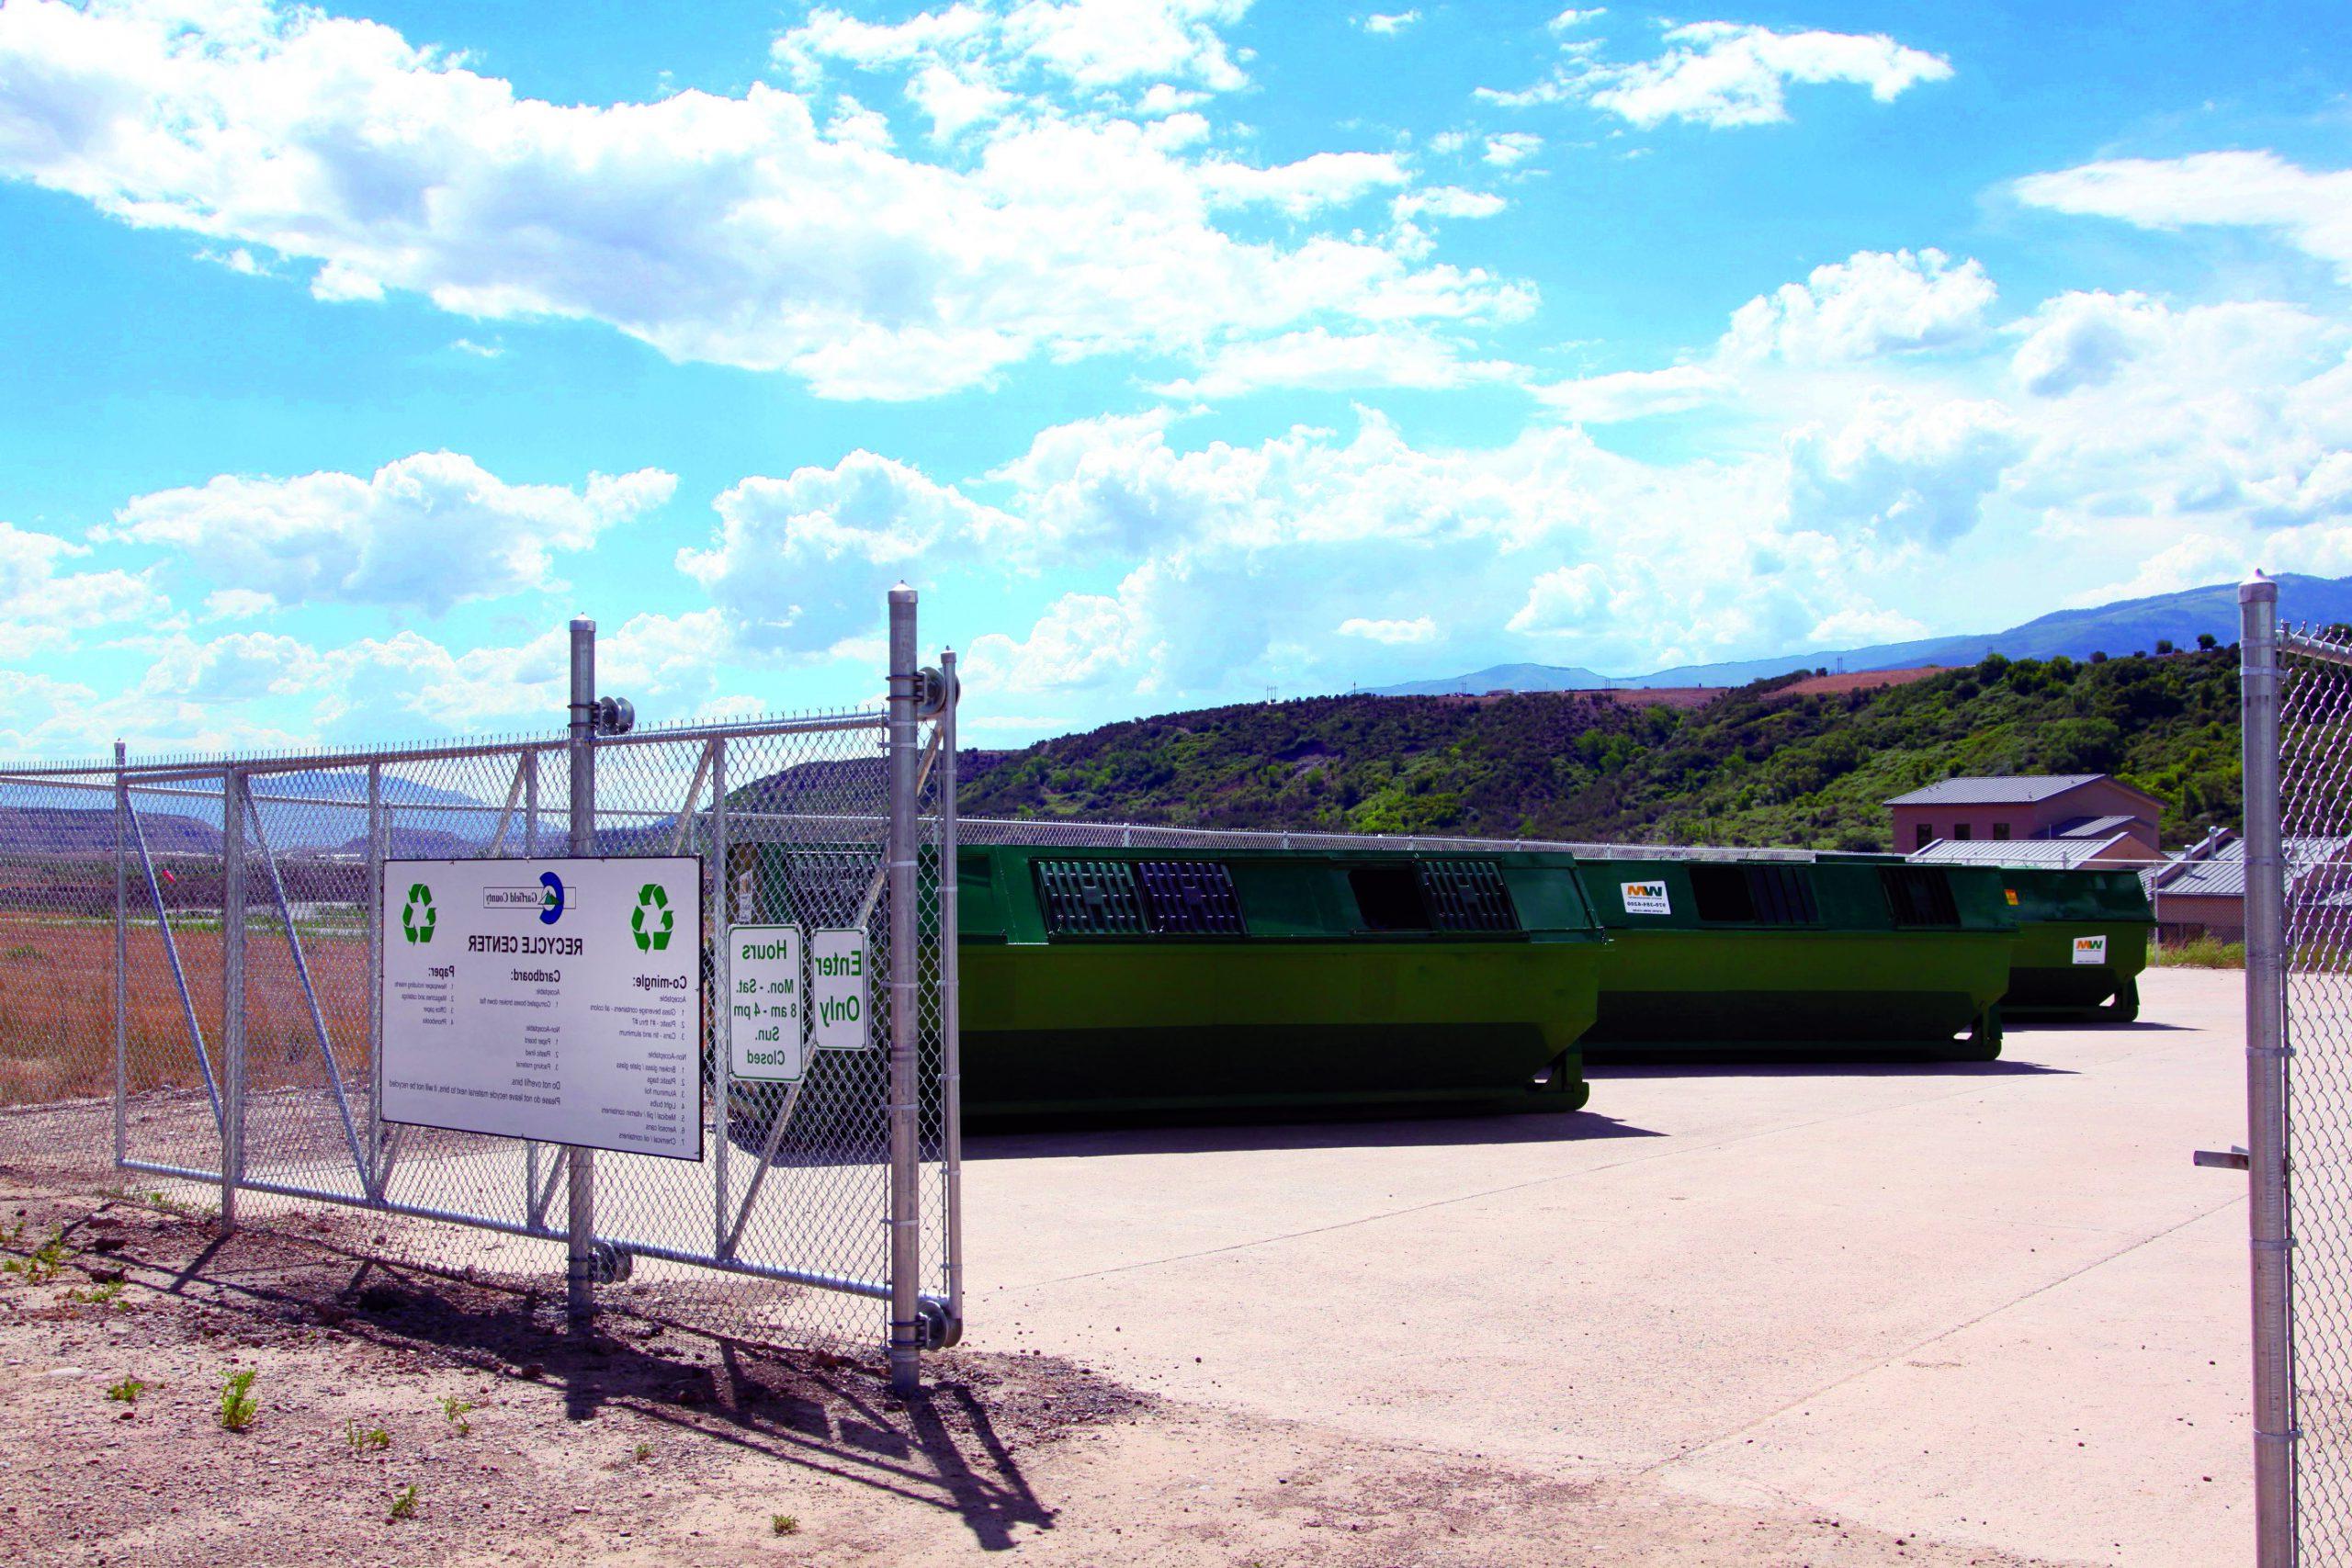 The Garfield County recycling center in Rifle, Colorado. 